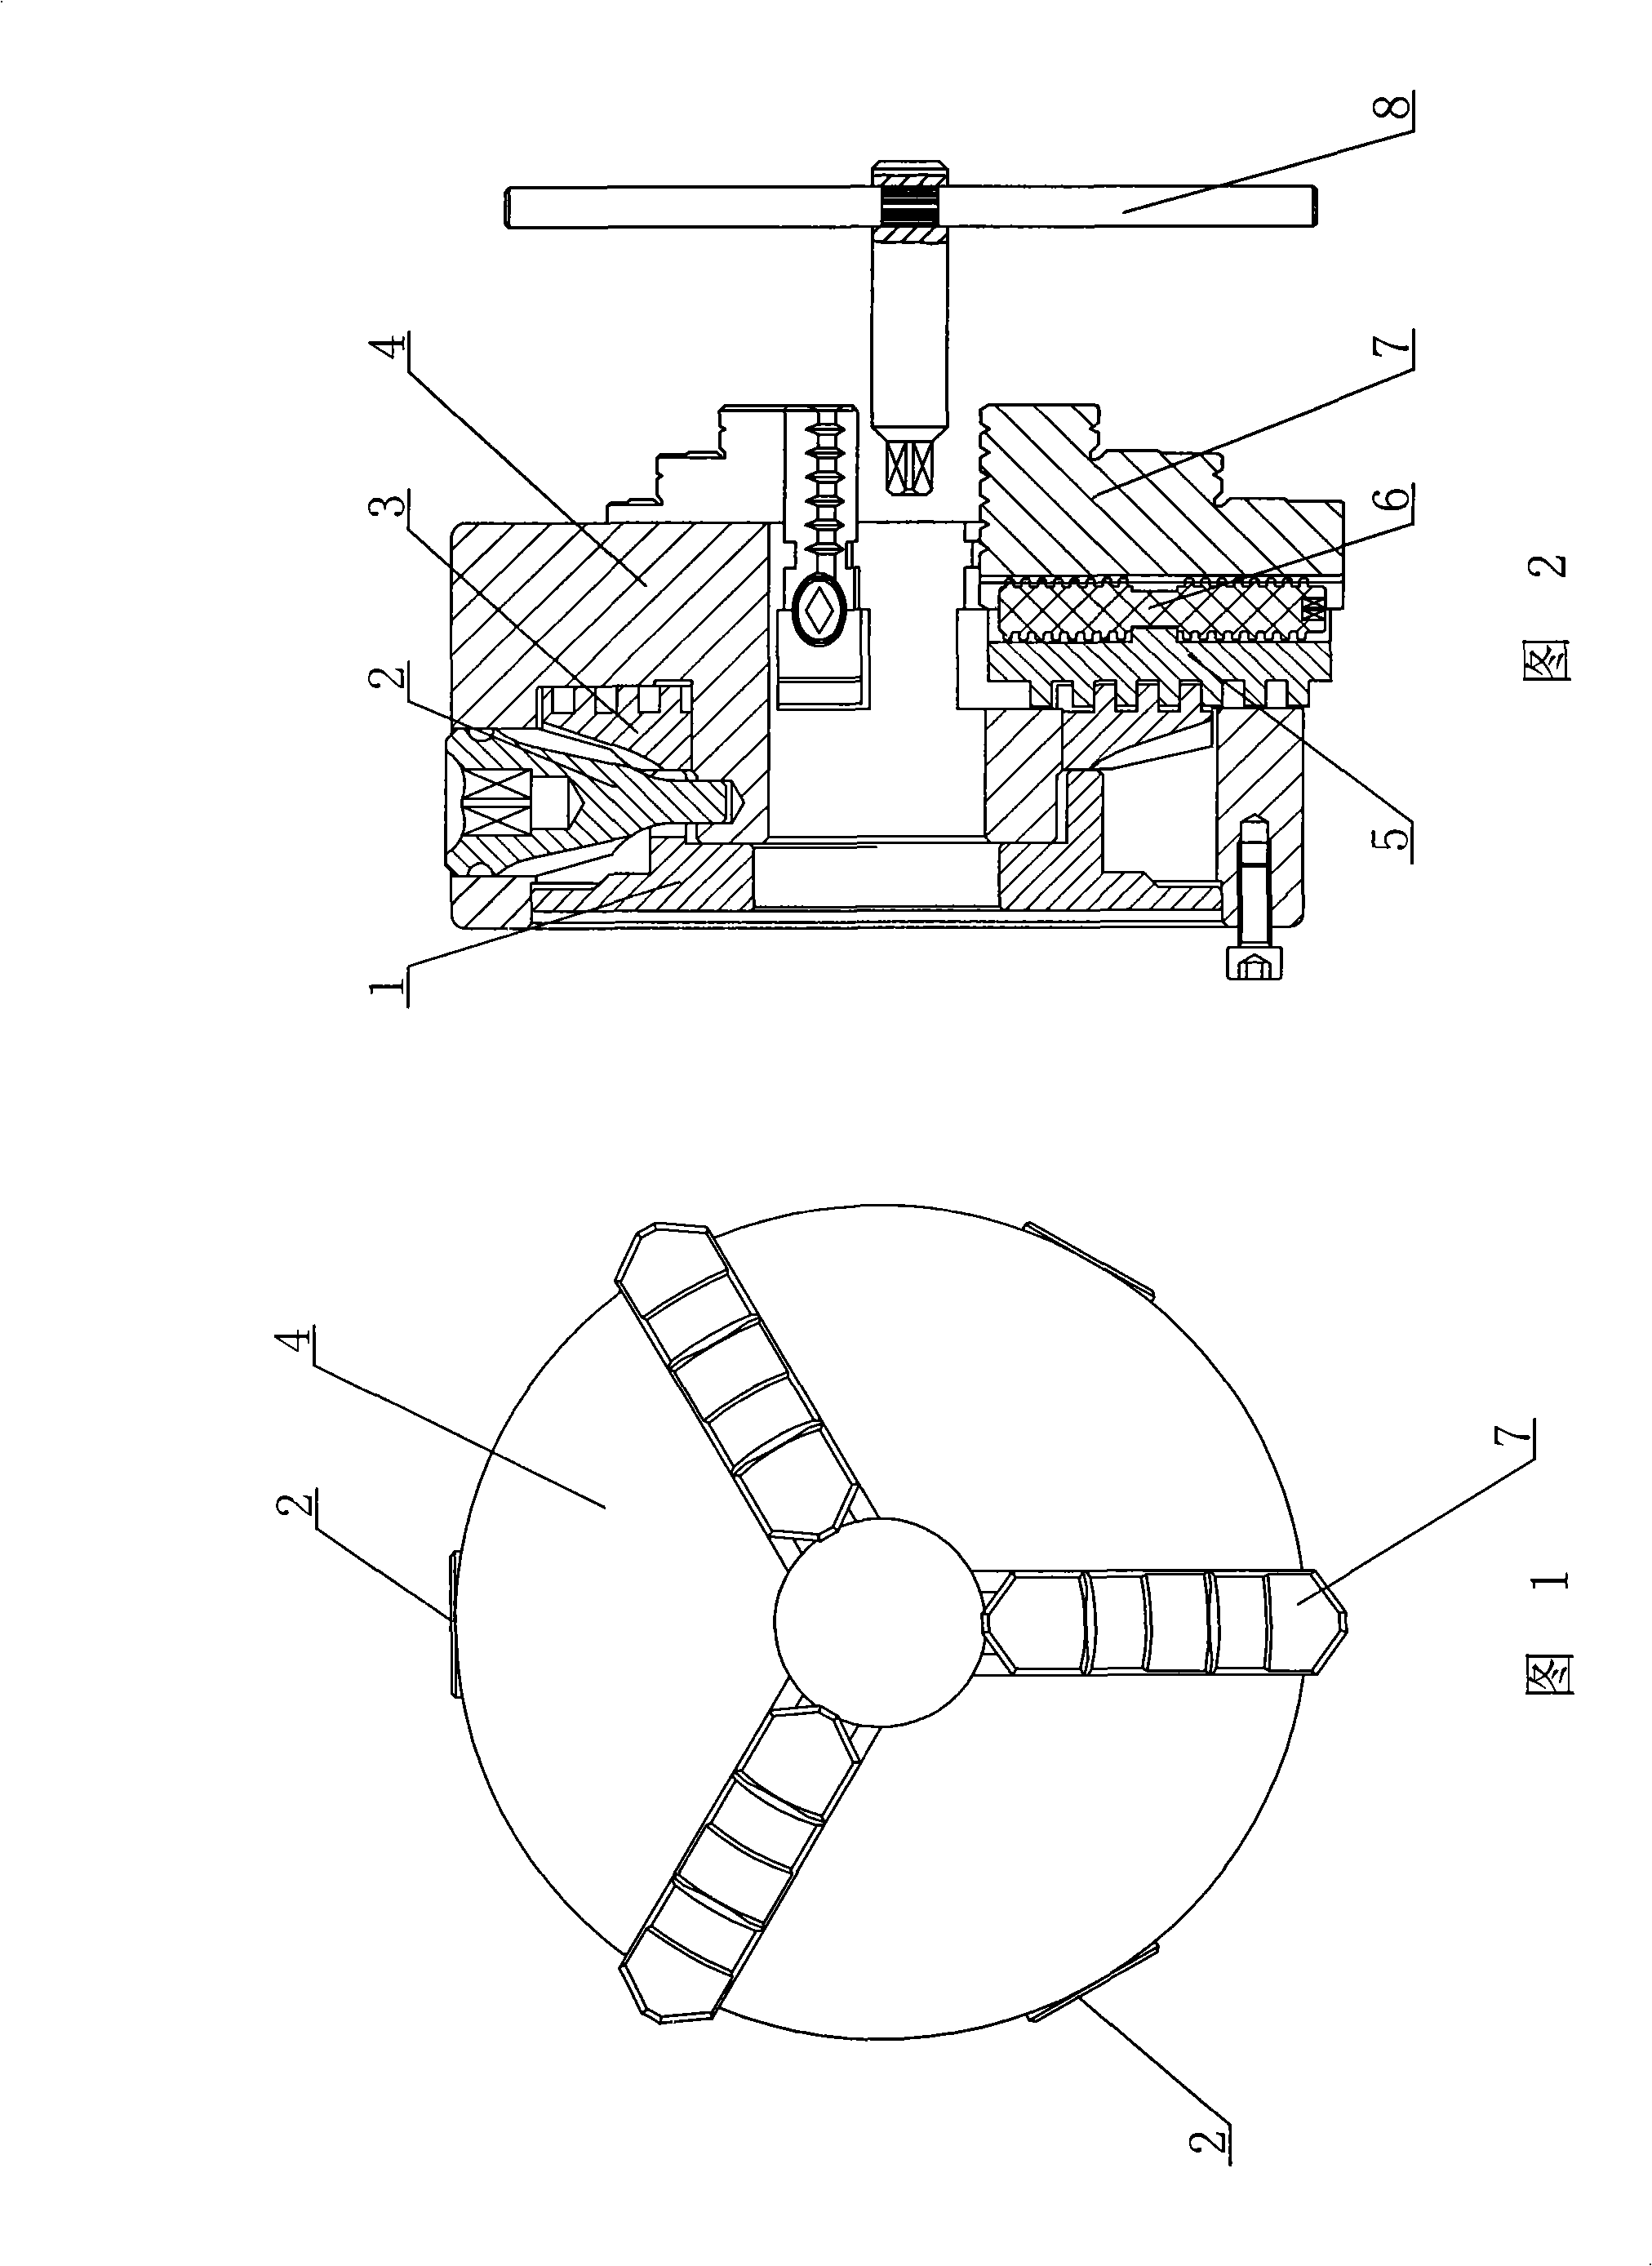 Improved three-jaw composite chuck